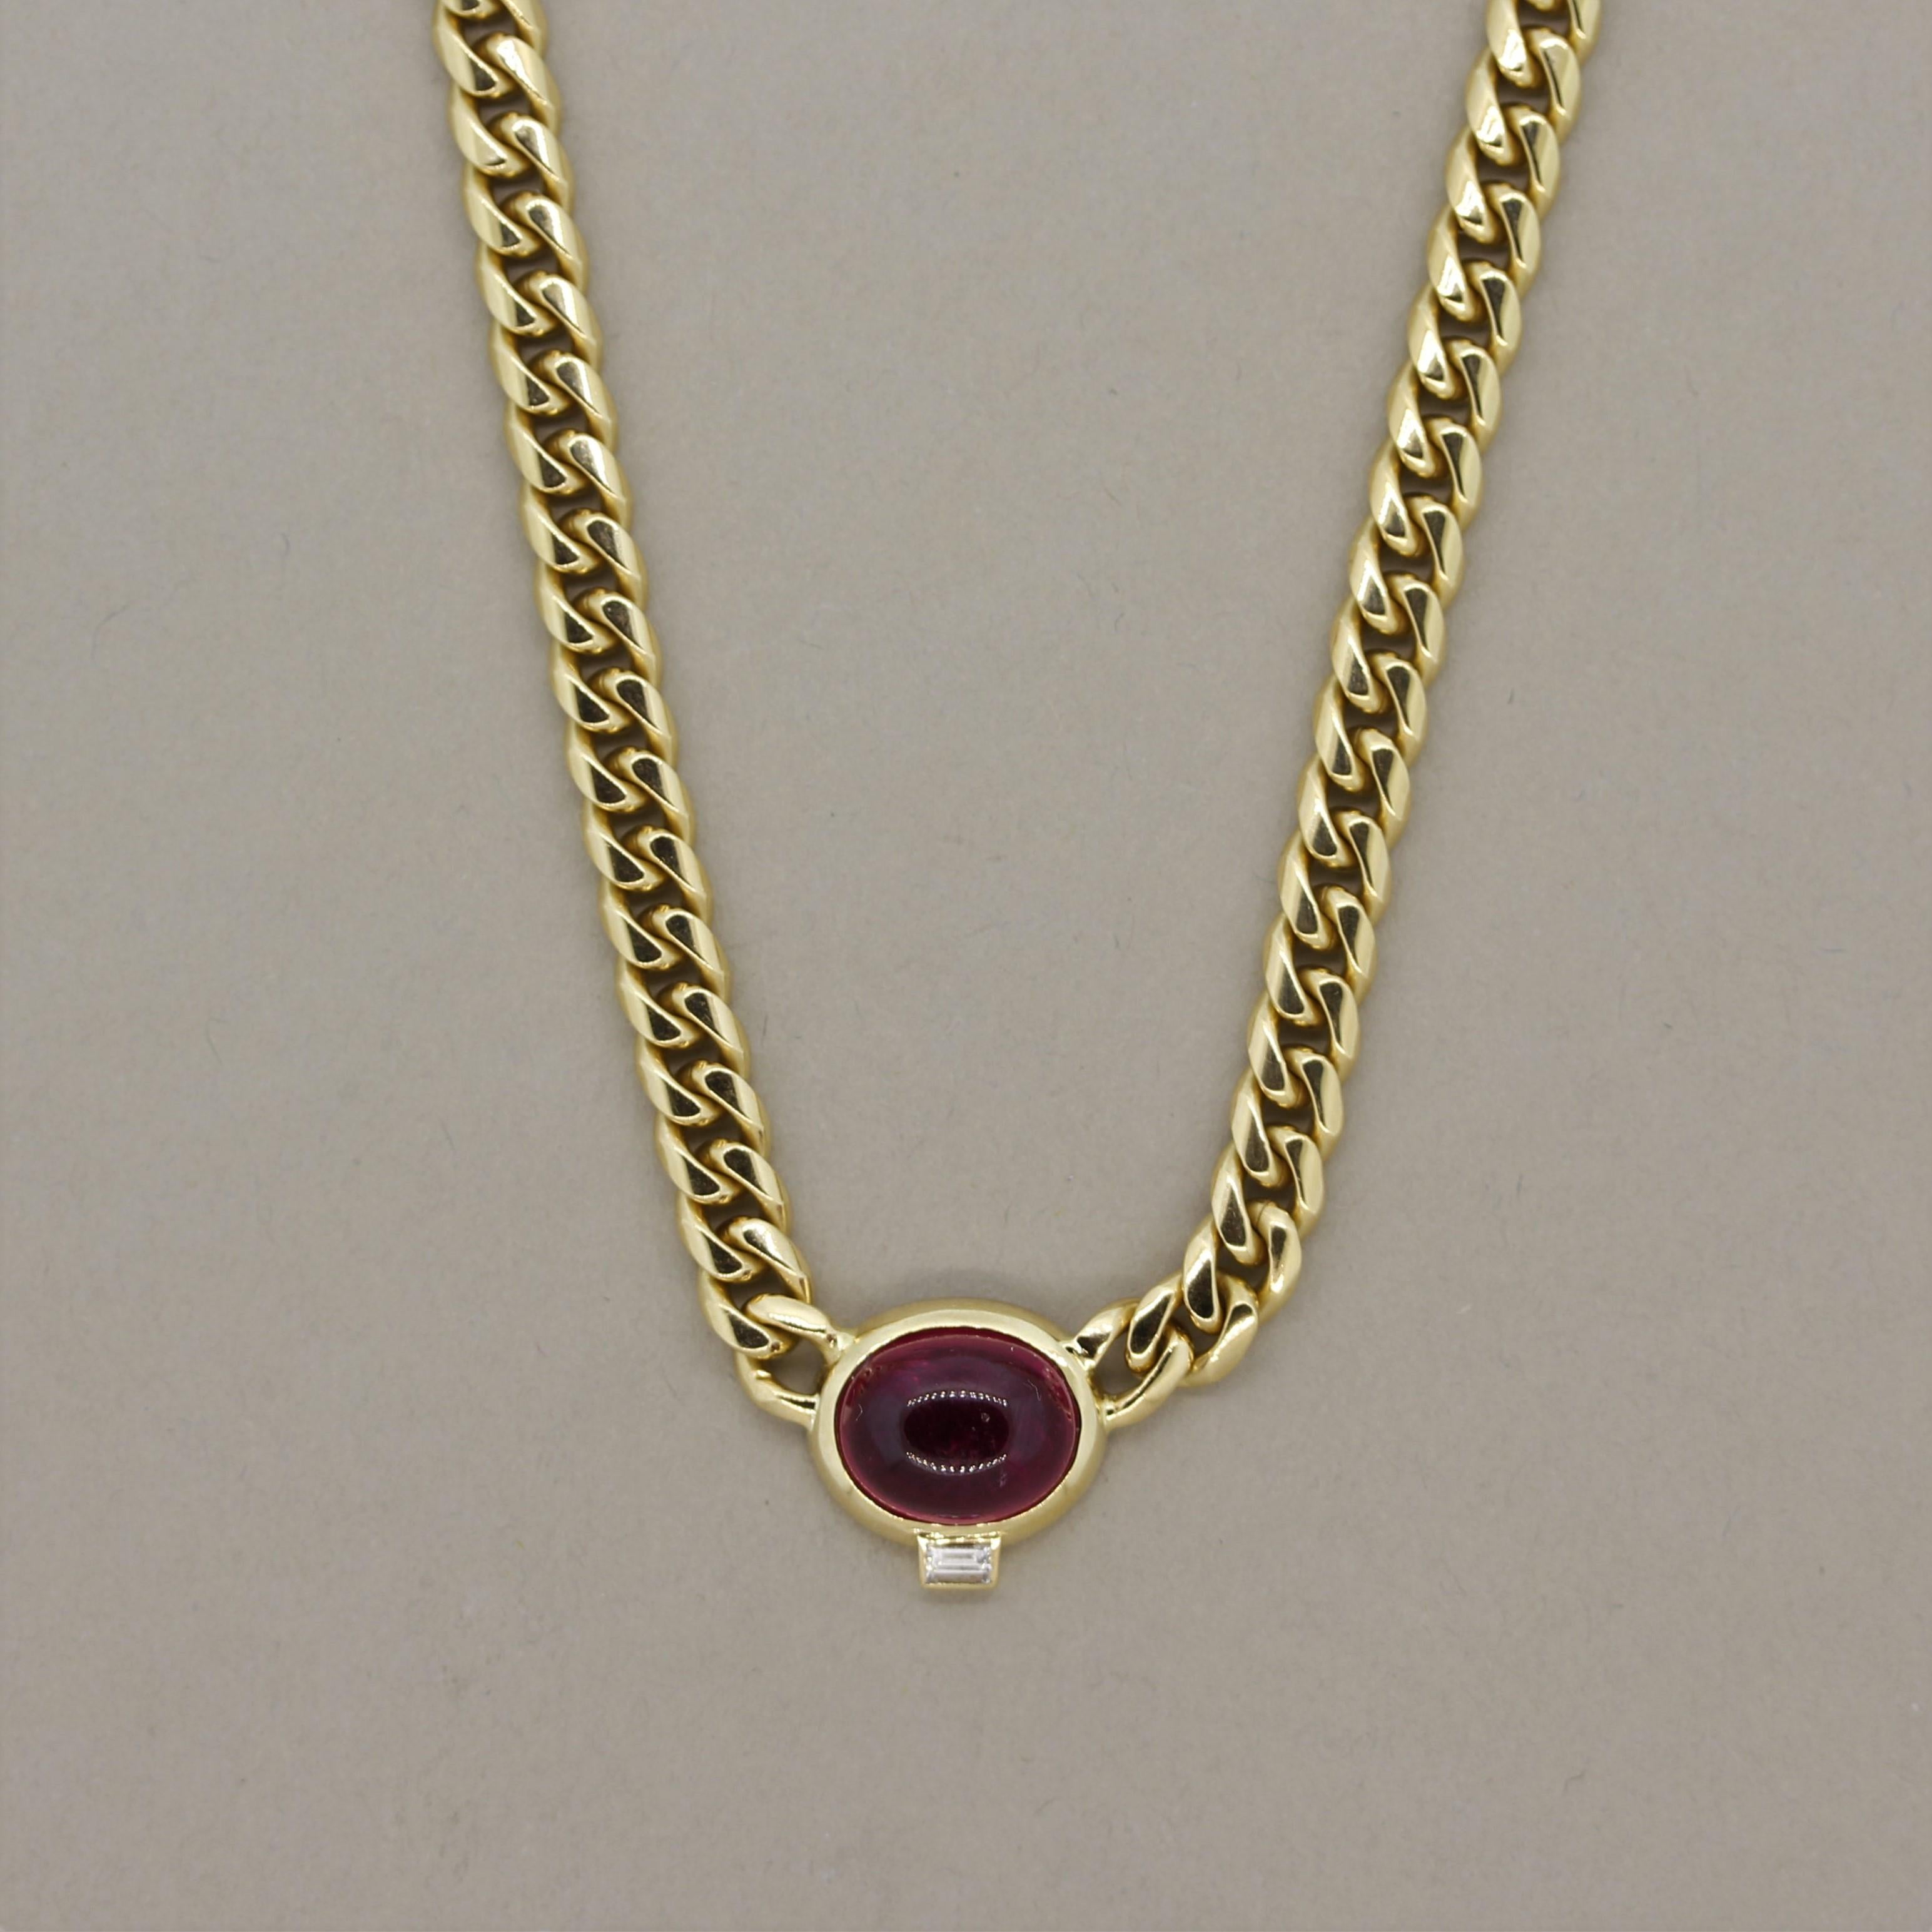 A chic and well-made curb link necklace set with a gem rubellite tourmaline. The tourmaline weighs 4.92 carats and has a magnificent vivid red color making it look like a fine ruby. Afterall, the top red tourmalines are given the name “rubellite” or